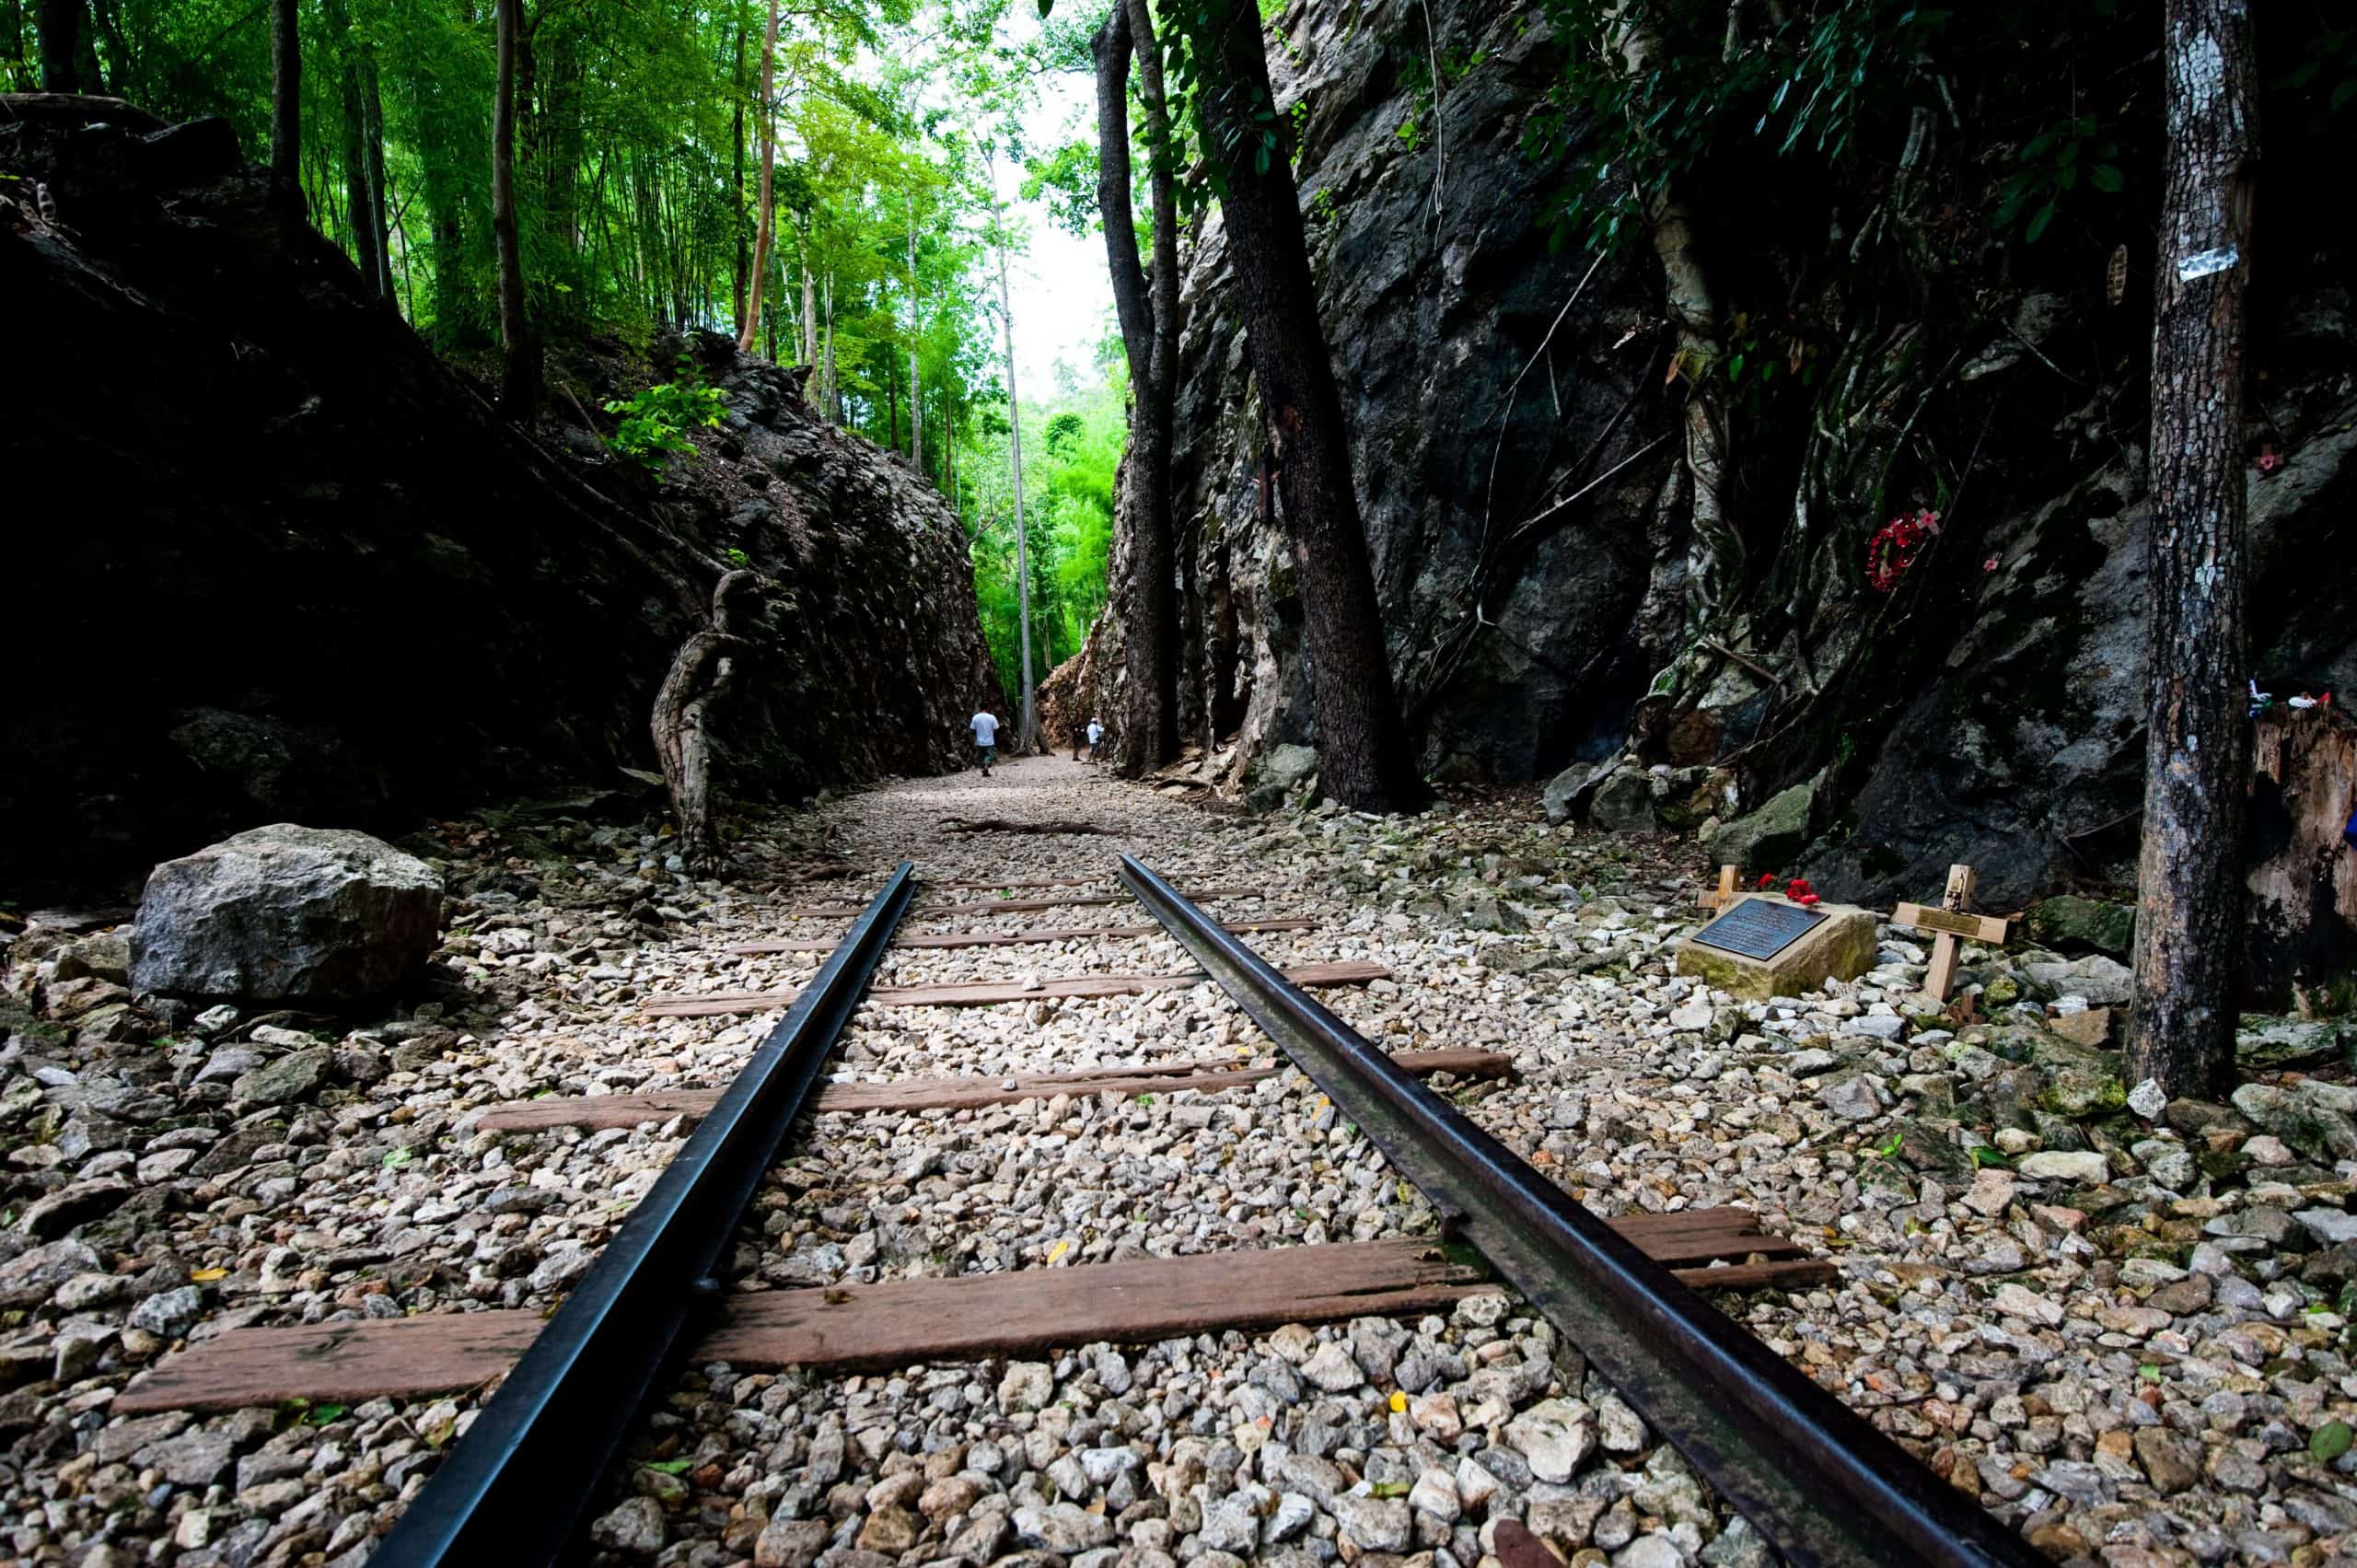 The remains of a rail track on a rocky path between two high cliffs - part of the Death Railway track in Kanchanaburi, Thailand.